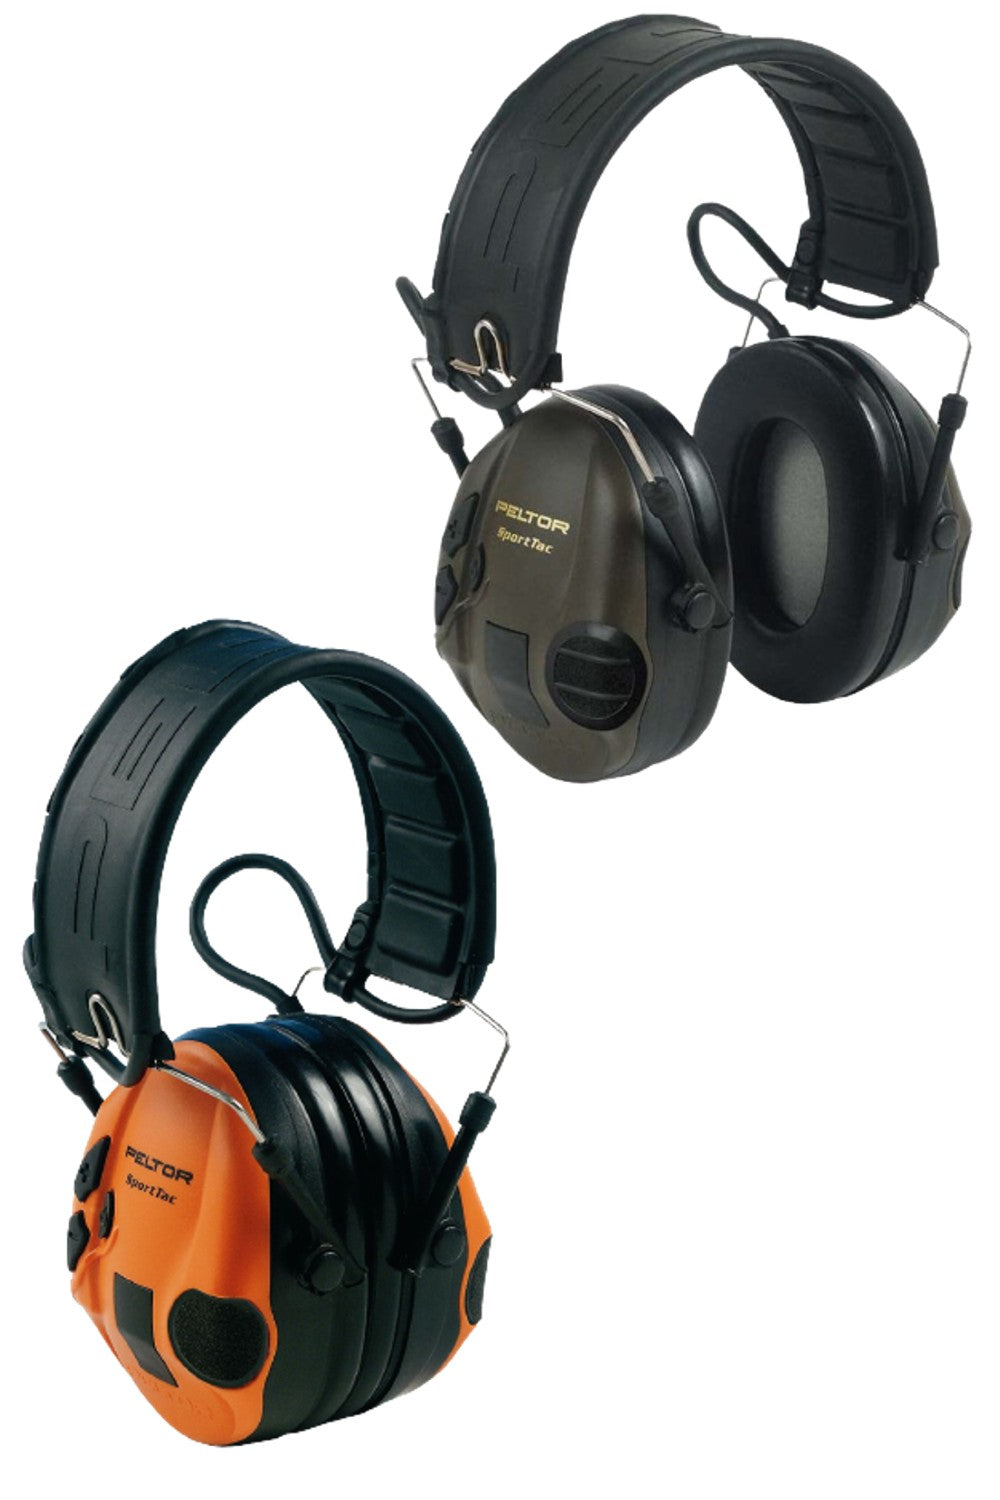 Peltor 3M SportTac Electronic Hearing Protection In Green and Orange